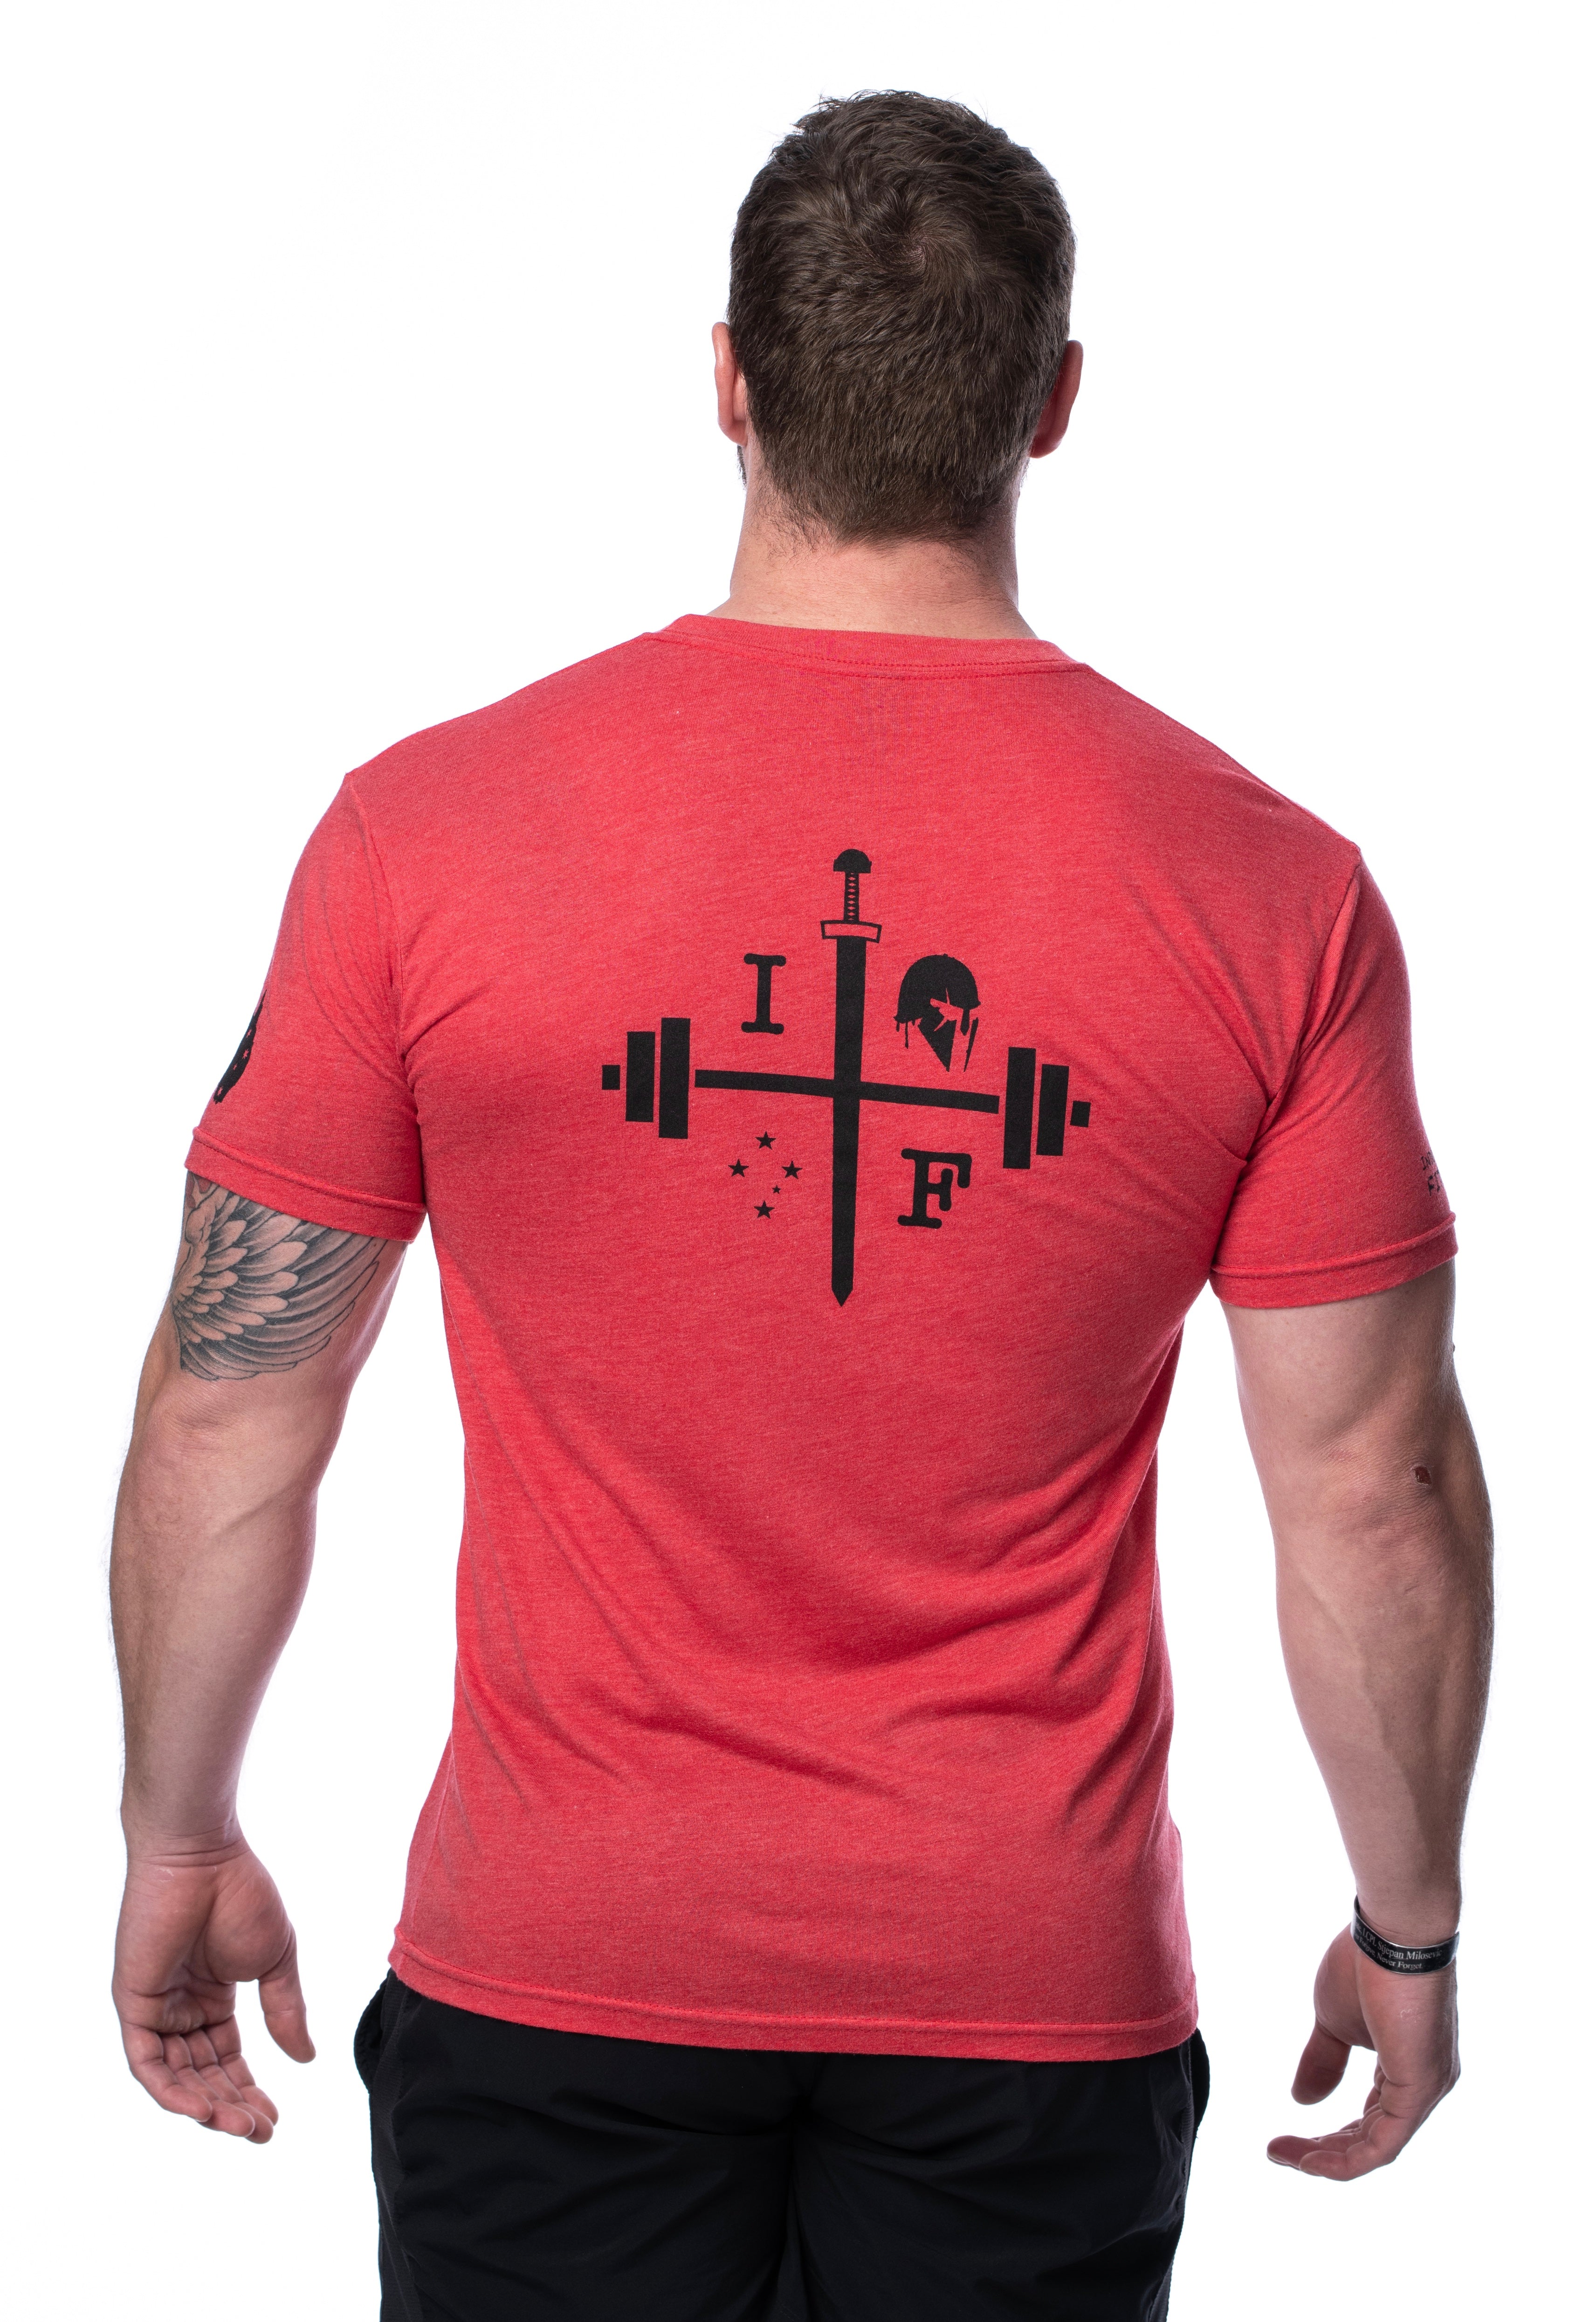 The Crusader Tee – Industrial Fitness